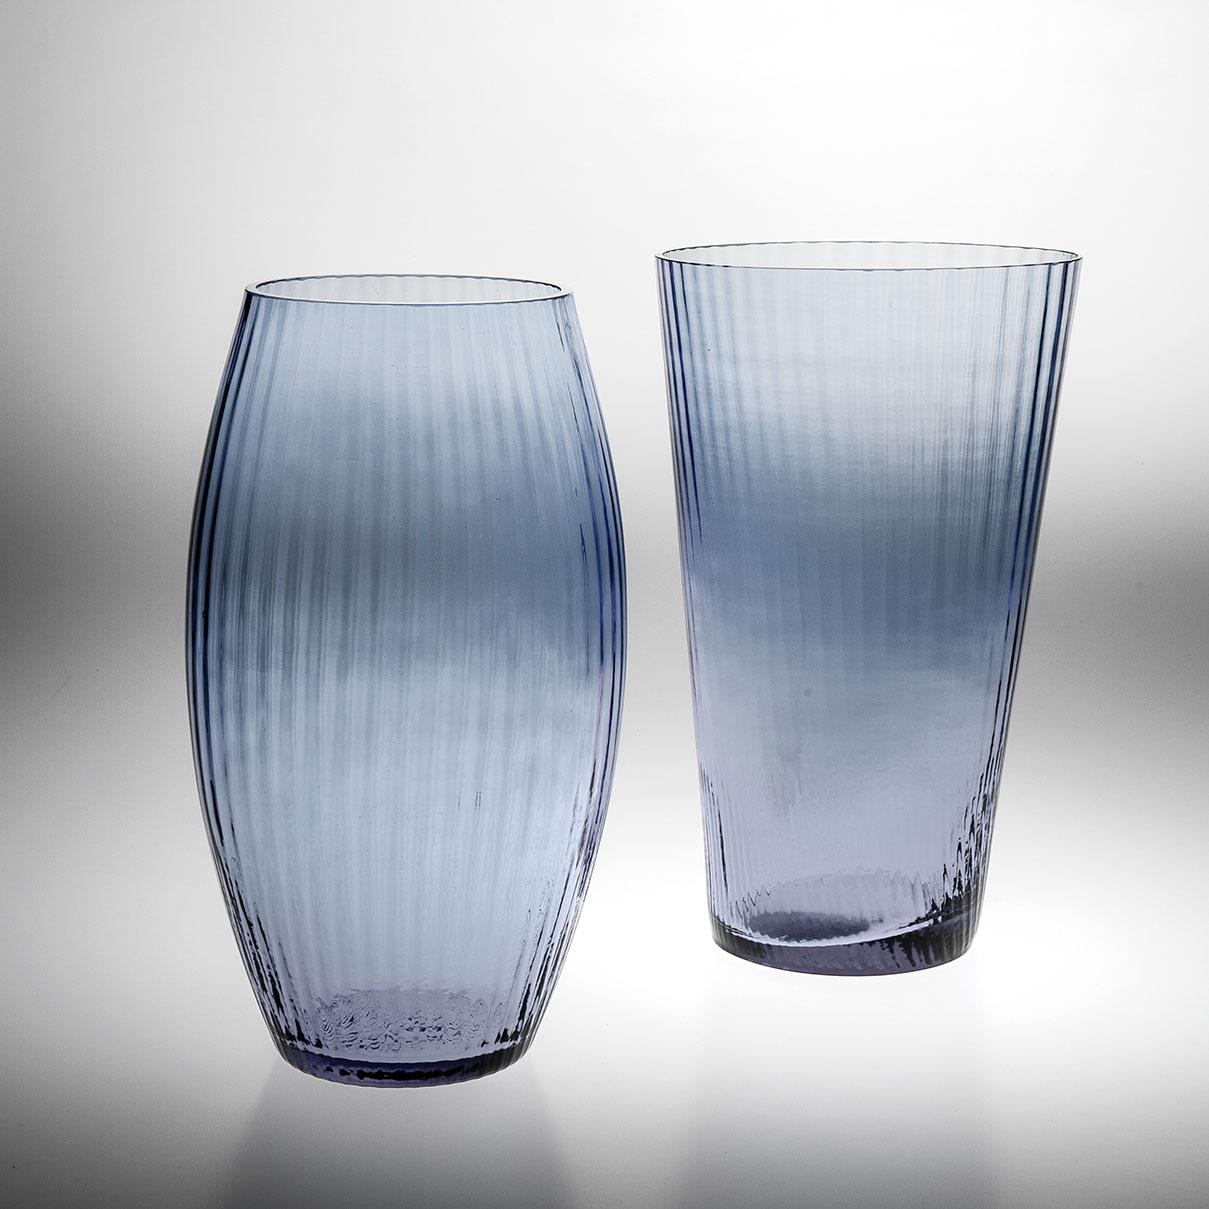 Hand-Crafted Vaso Squadrato28, Vase Handcrafted Muranese Glass, Rose Quartz Plisse MUN by VG